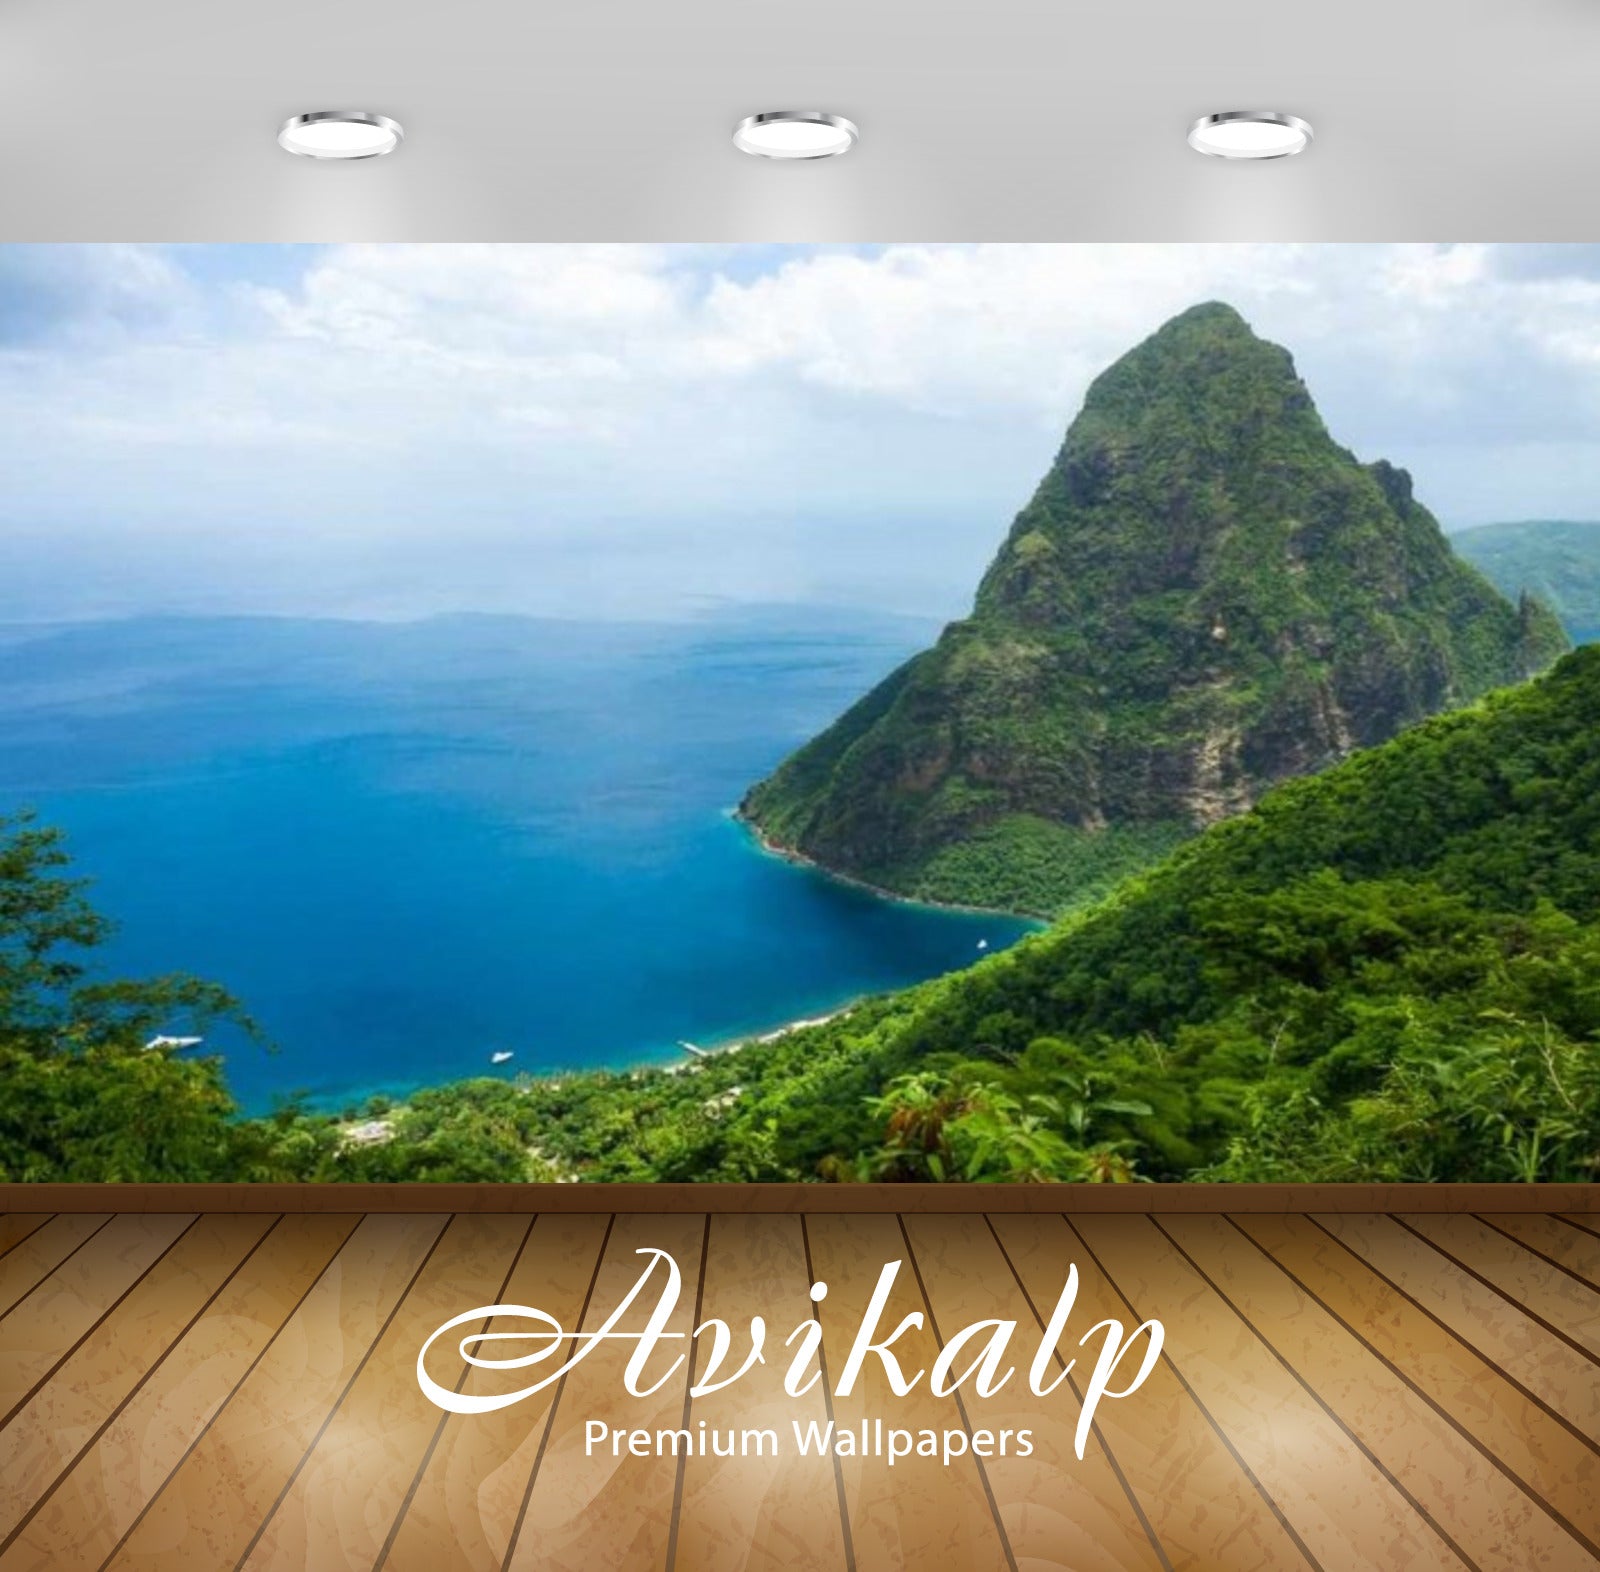 Avikalp Exclusive Awi2688 Gros Piton Mountain Climb St. Lucia Full HD Wallpapers for Living room, Ha